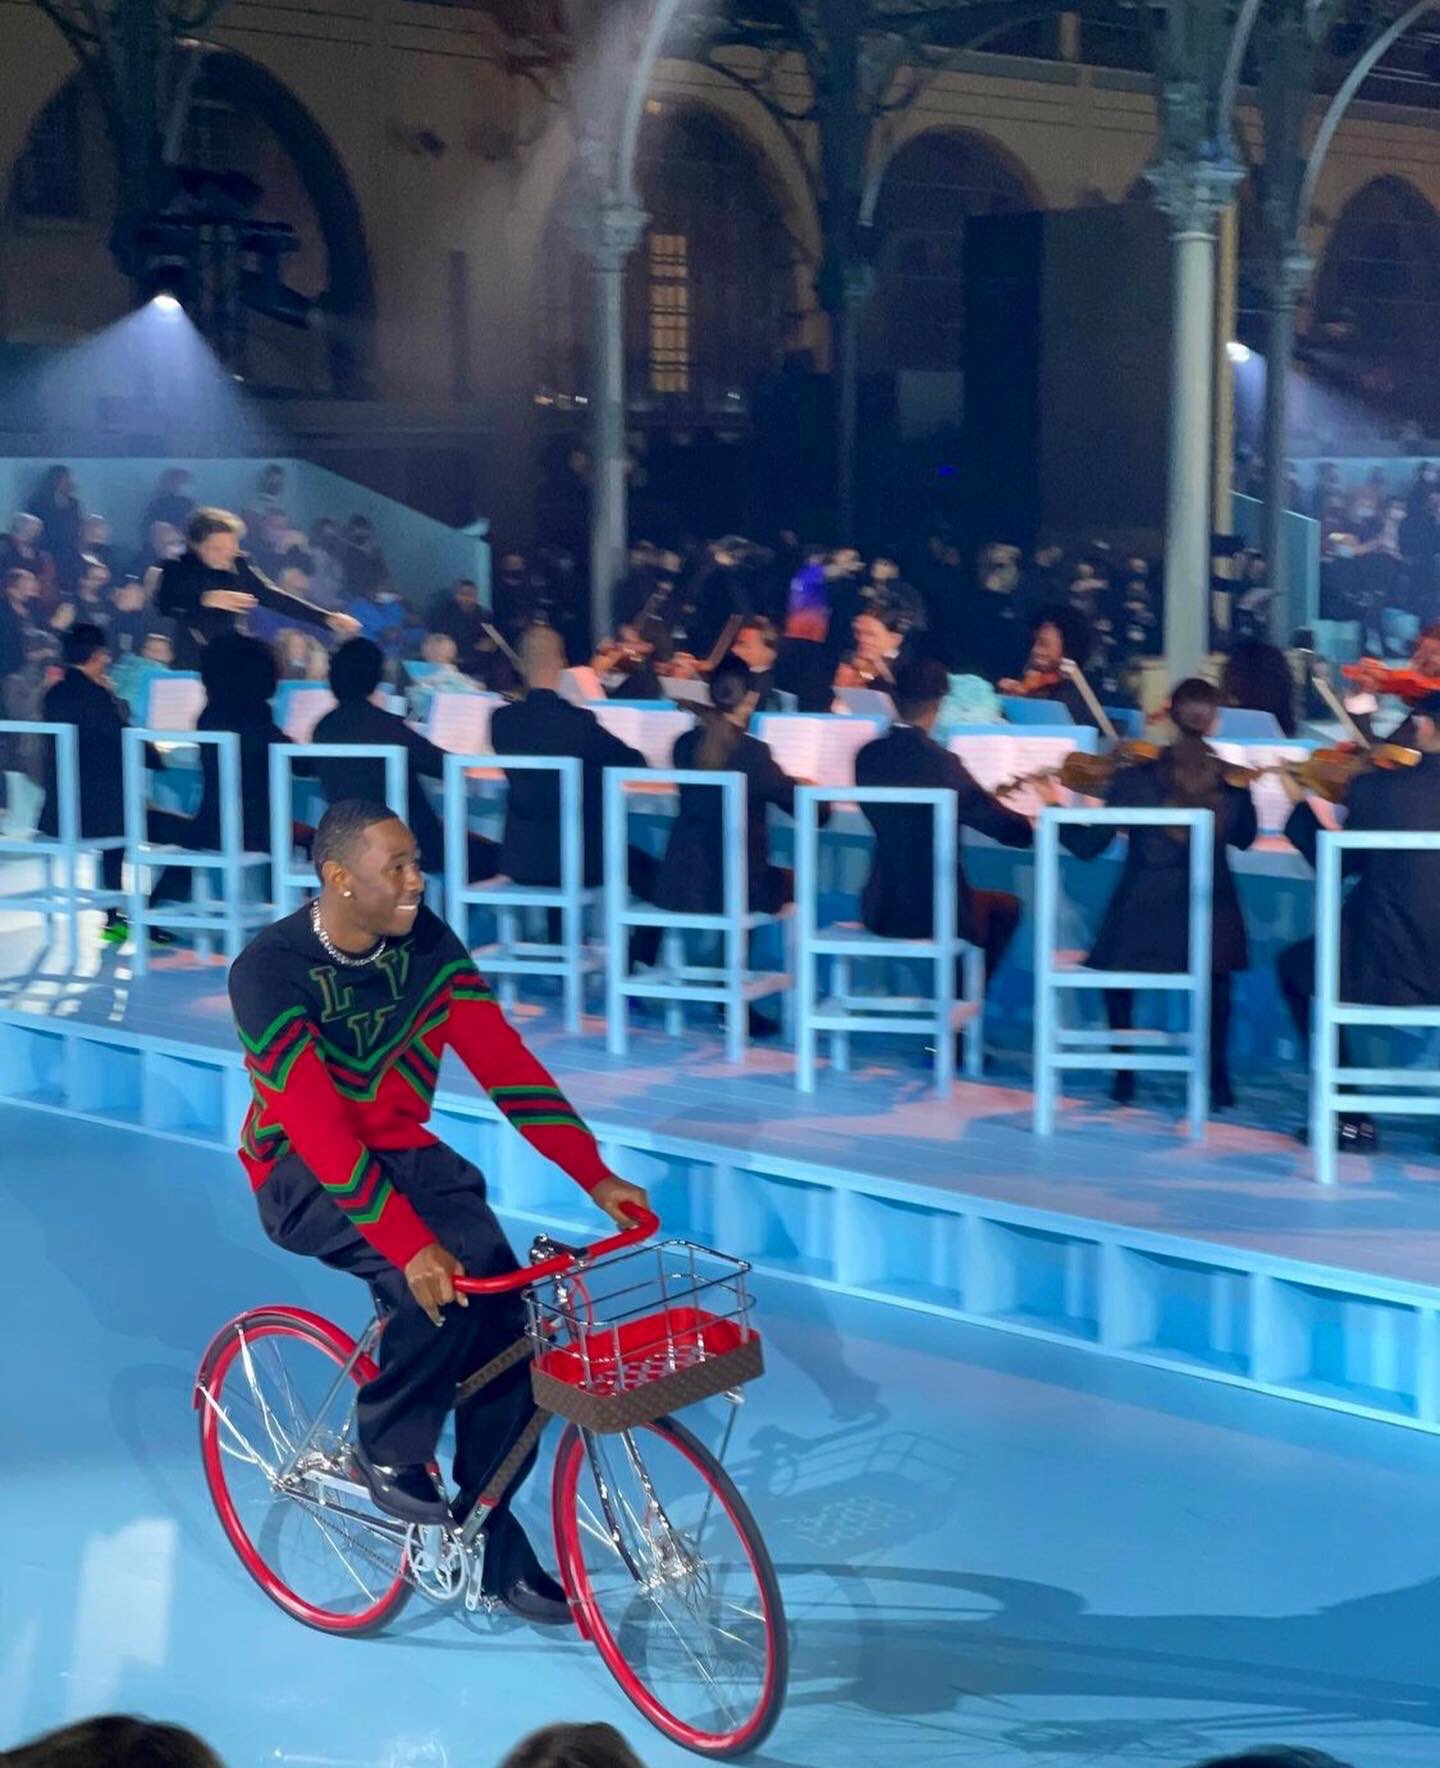 A closer look at Louis Vuitton's x Maison Tamboite Paris LV Bike: “Tyler,  the Creator was one of the highlights of the Louis Vuitton…